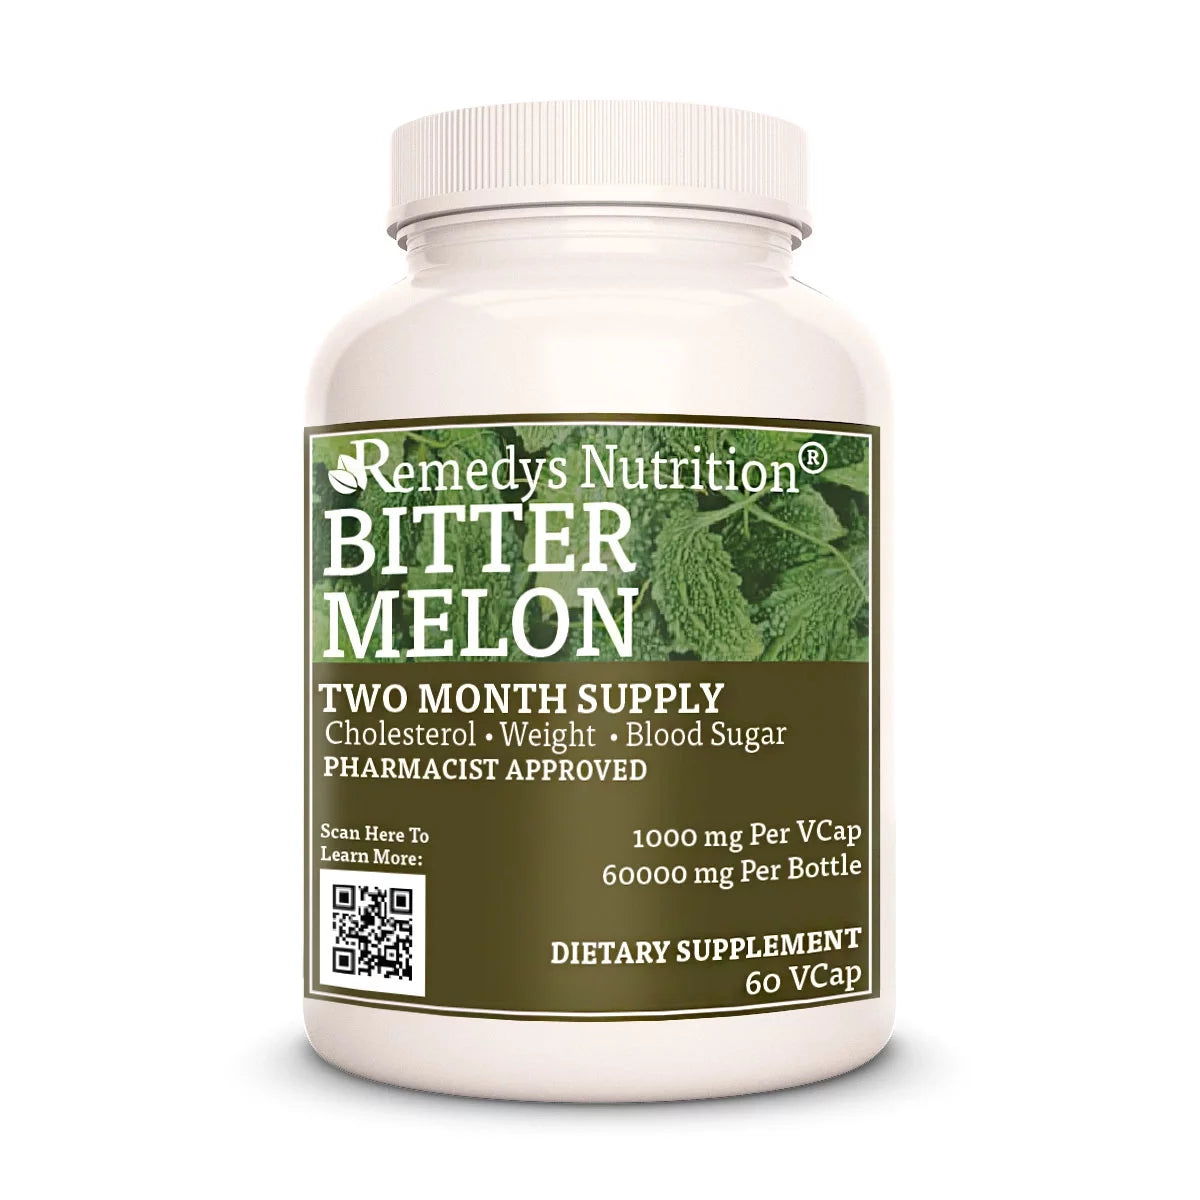 Image of Remedy's Nutrition® Bitter Melon Capsules Herbal Supplement front bottle. Made in the USA. Momordica charantia.